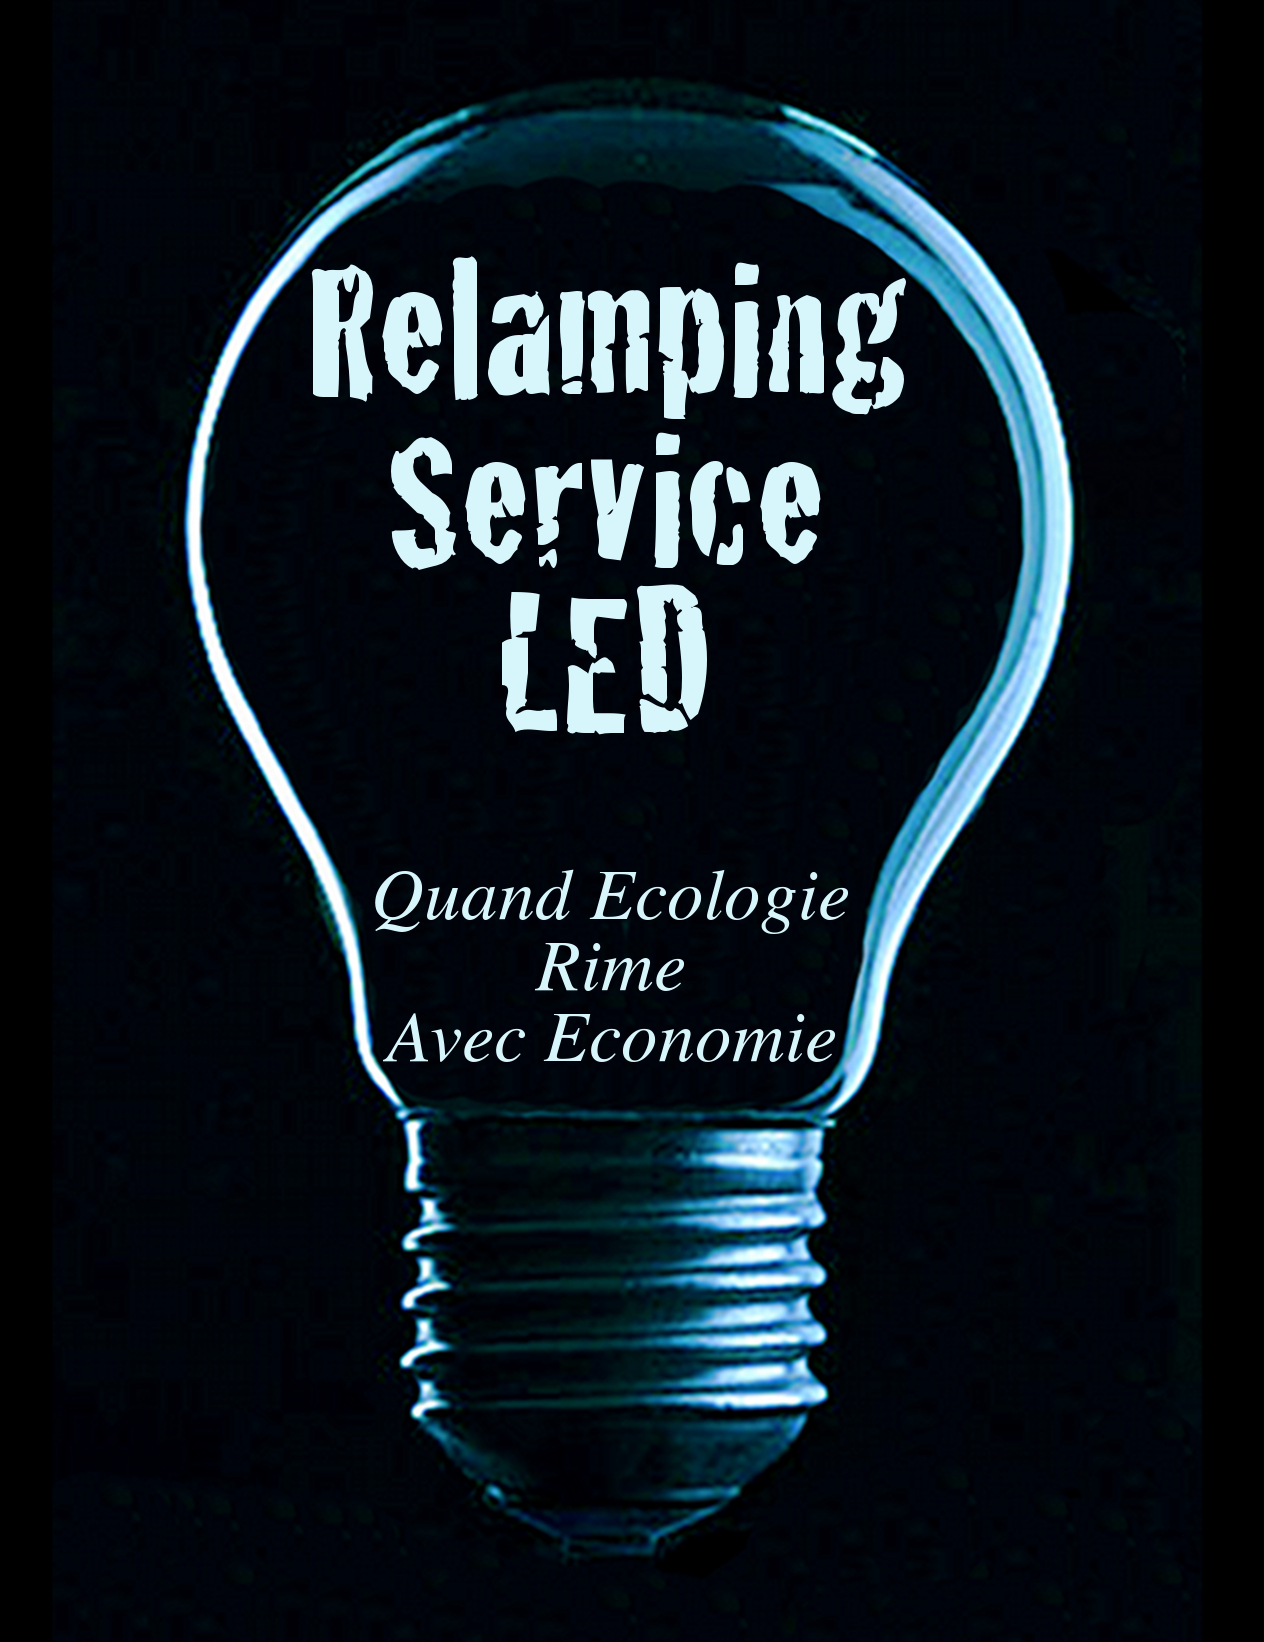 Relamping Service LED